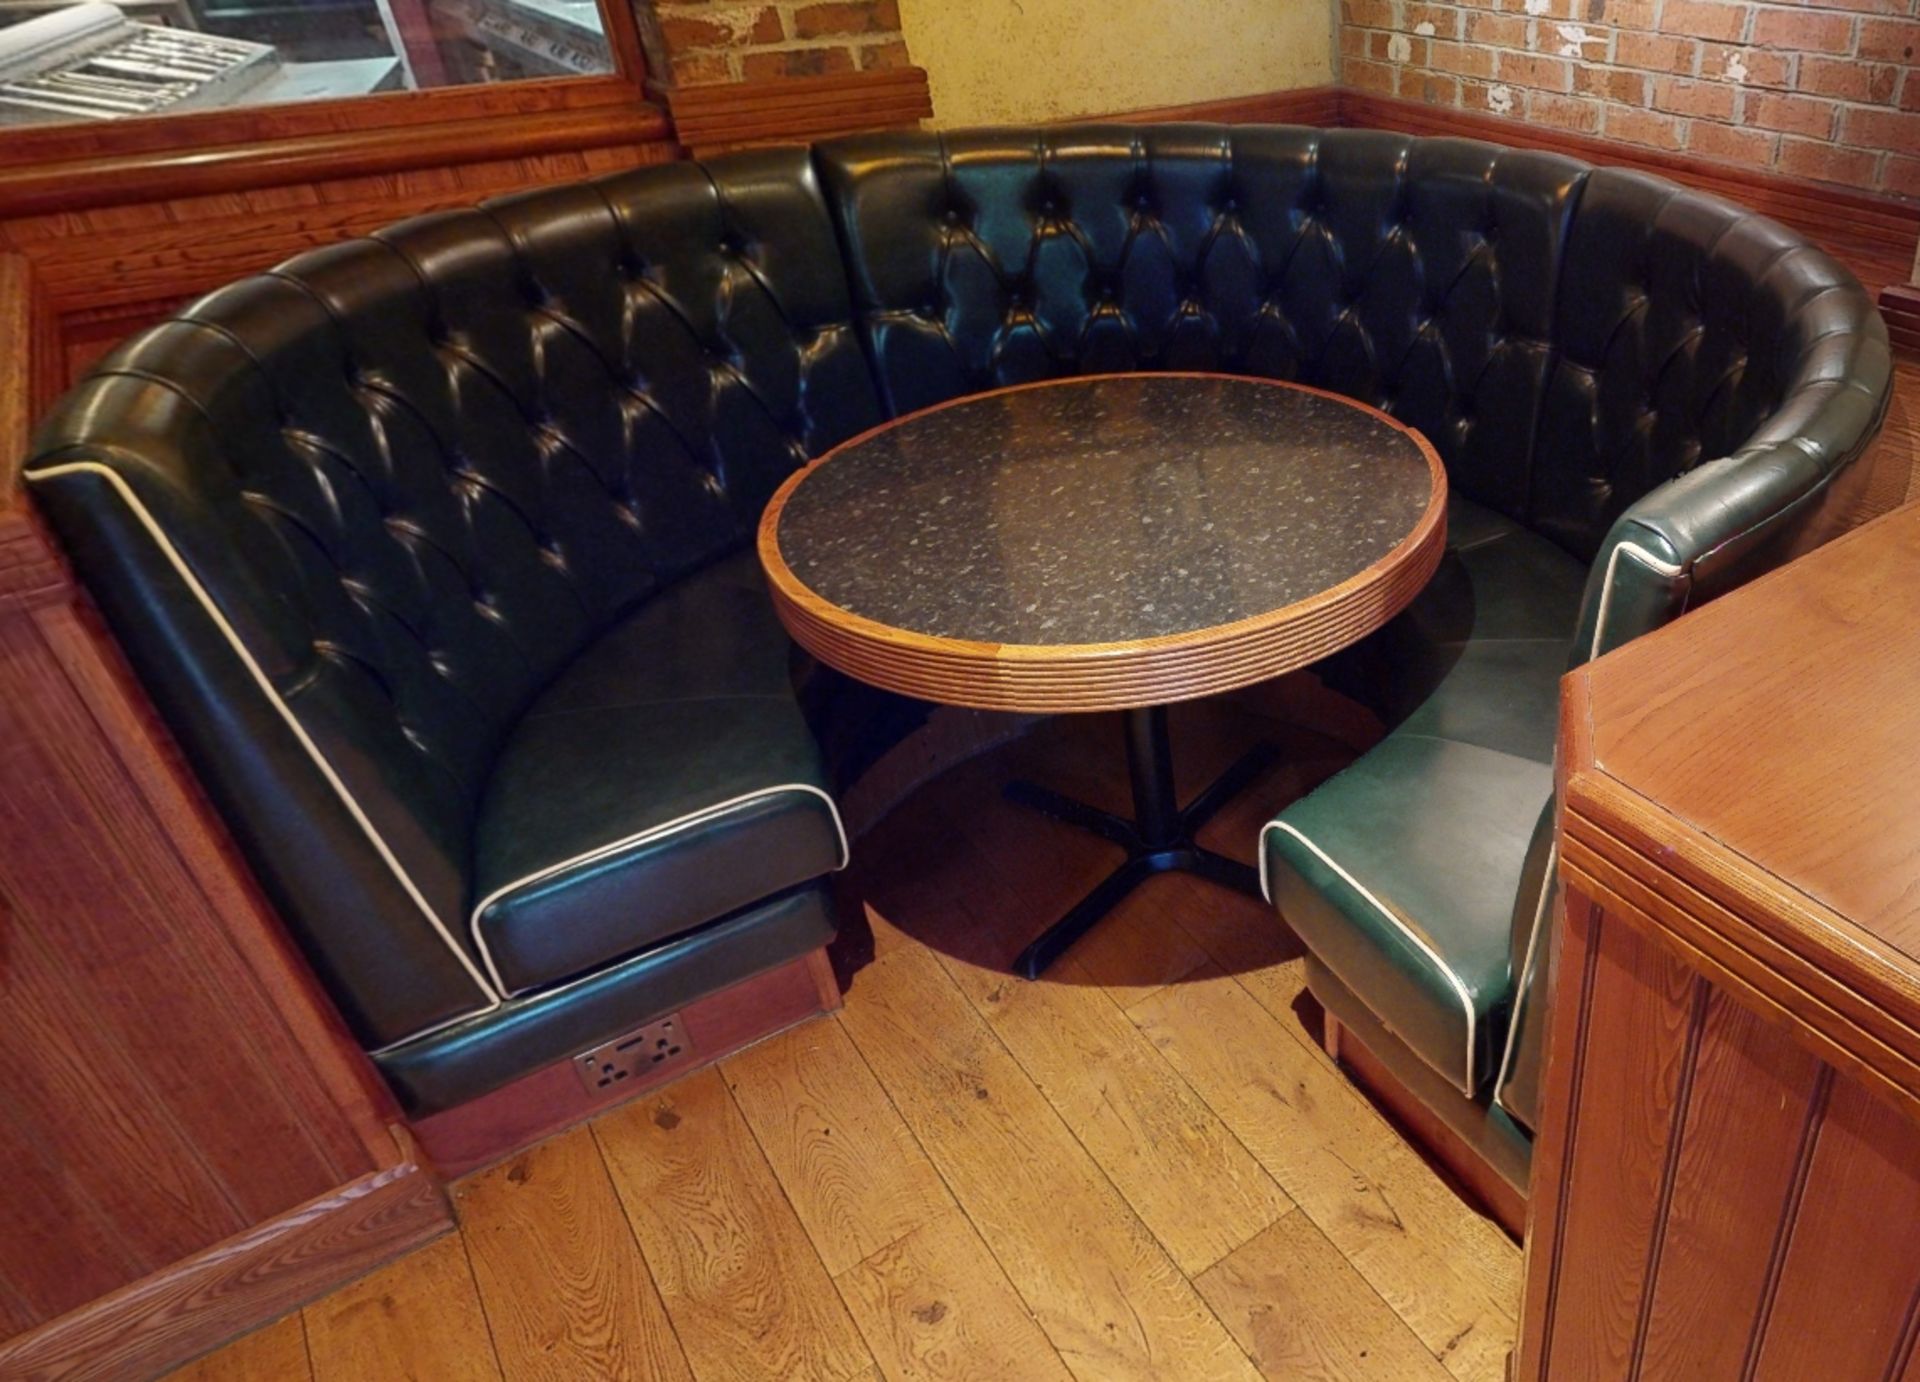 1 x Restaurant C-Shape Seating Booth In Green, With Faux Leather Upholstery With Buttoned High Backs - Image 2 of 3